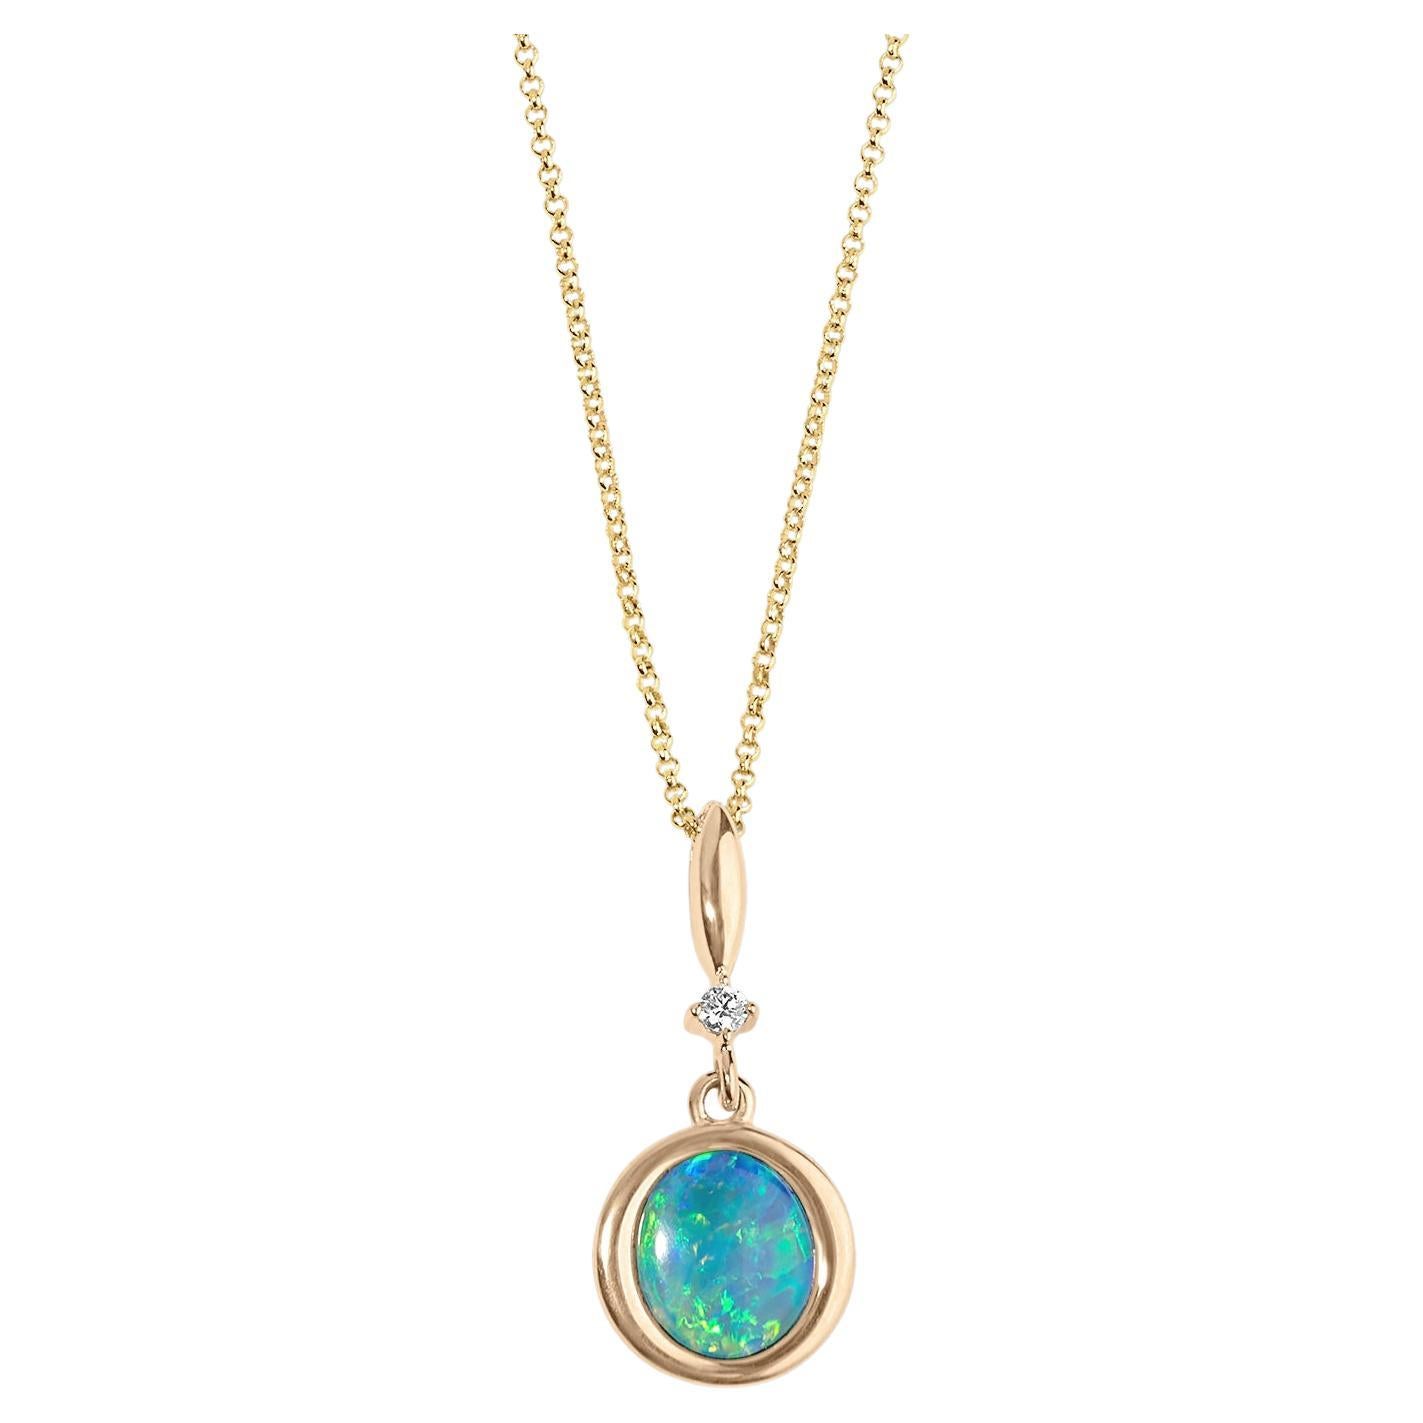 Round, Australian Opal Inlay Pendant with Diamond Detail, 14kt Gold by Kabana For Sale